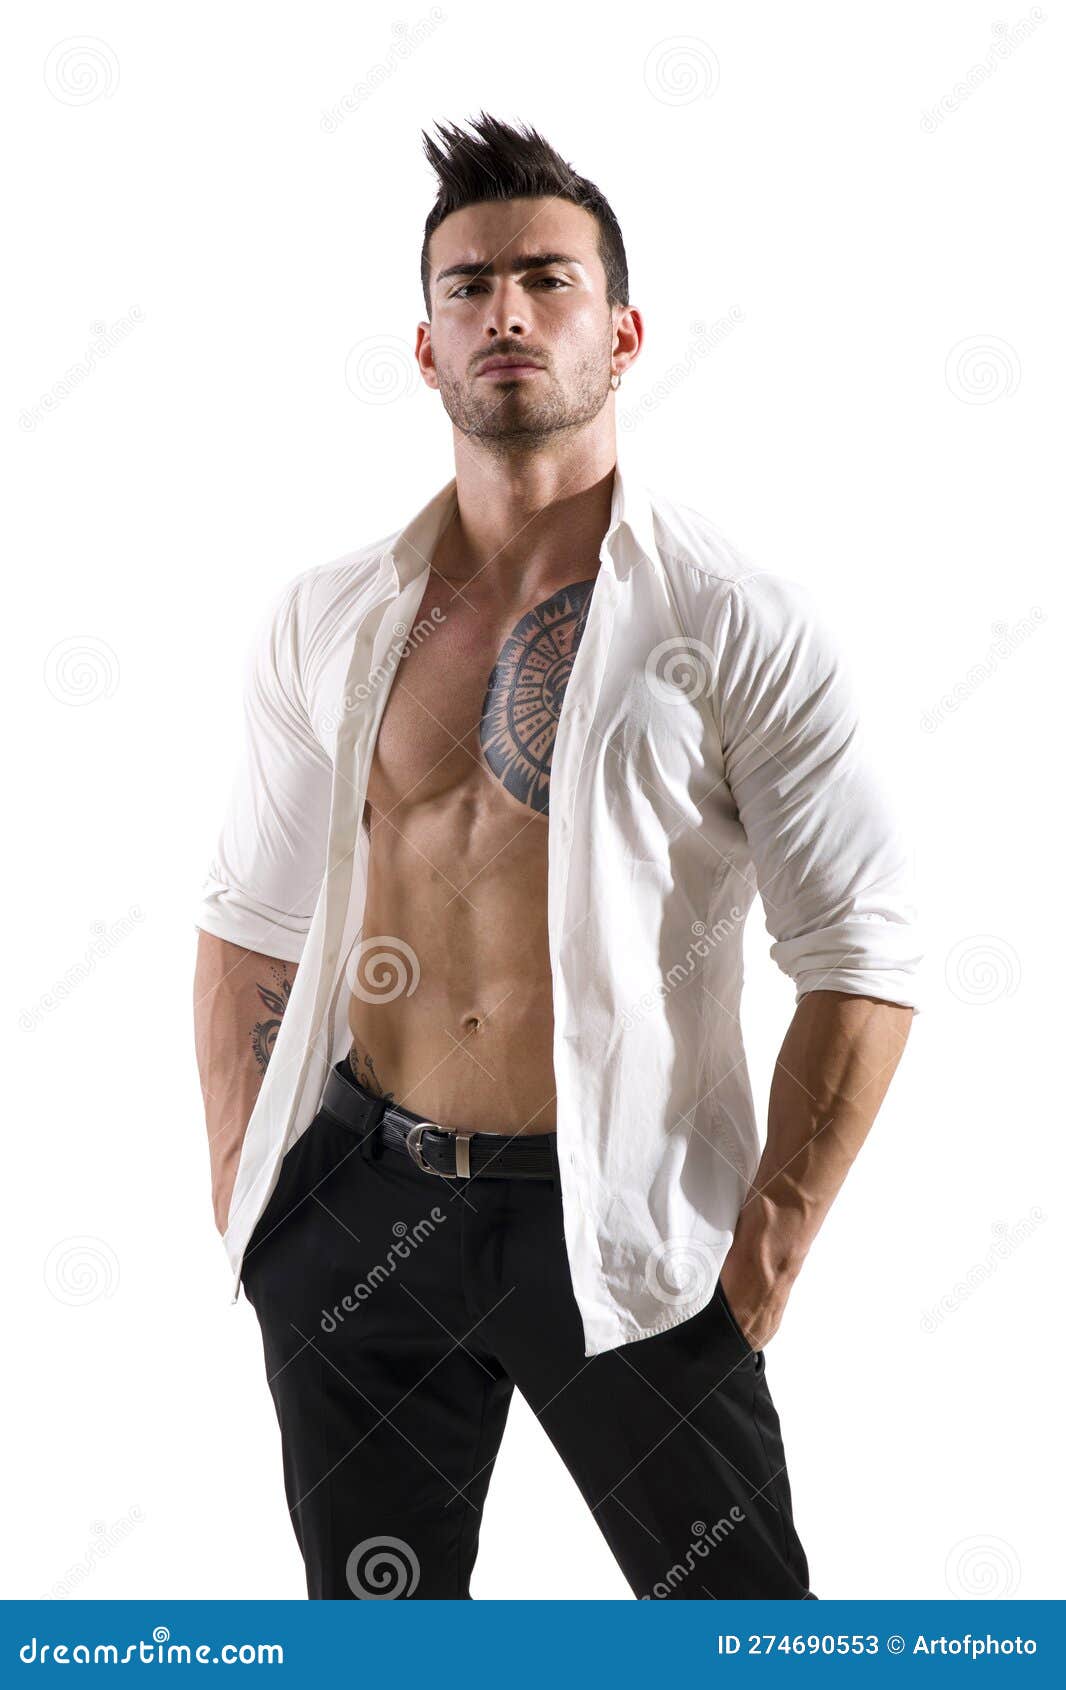 Confident, Attractive Young Man with Open Shirt on Muscular Chest